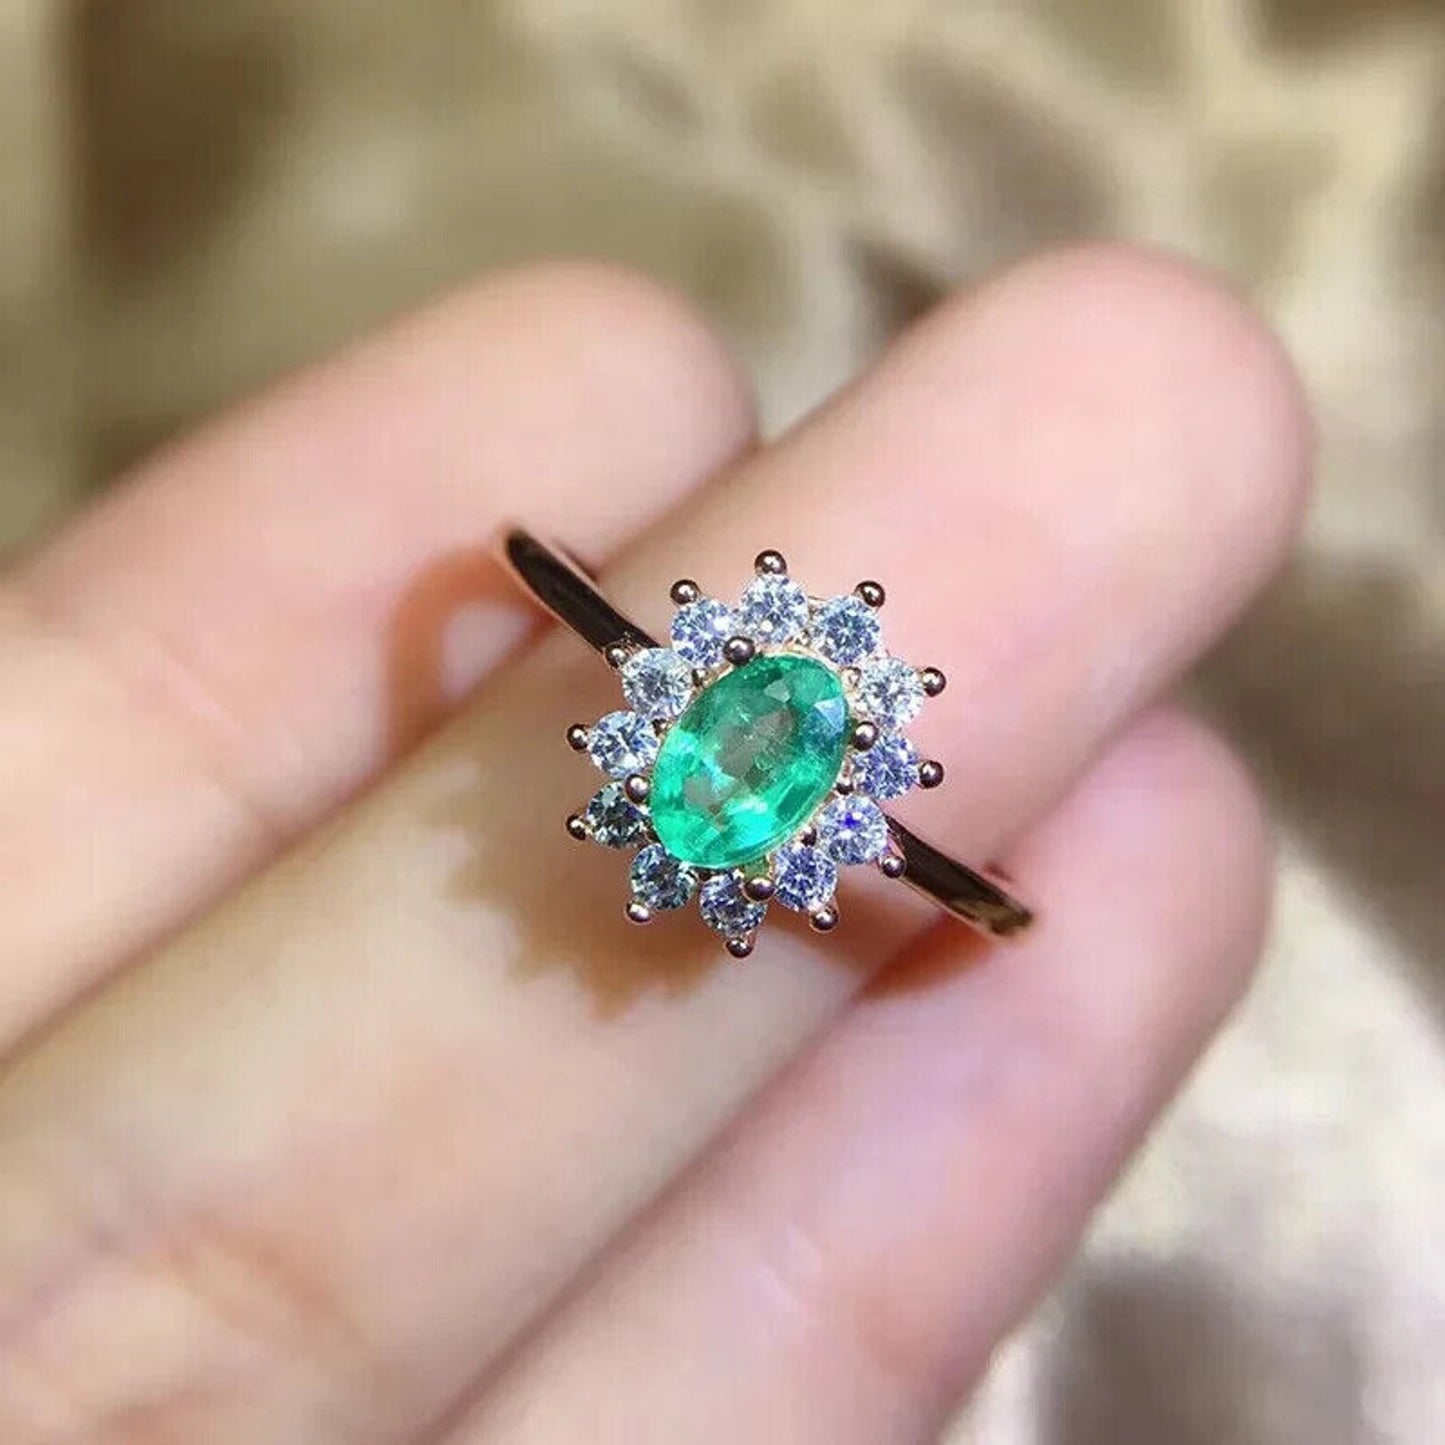 Dainty Emerald Cocktail Ring 4x6mm Sterling Silver